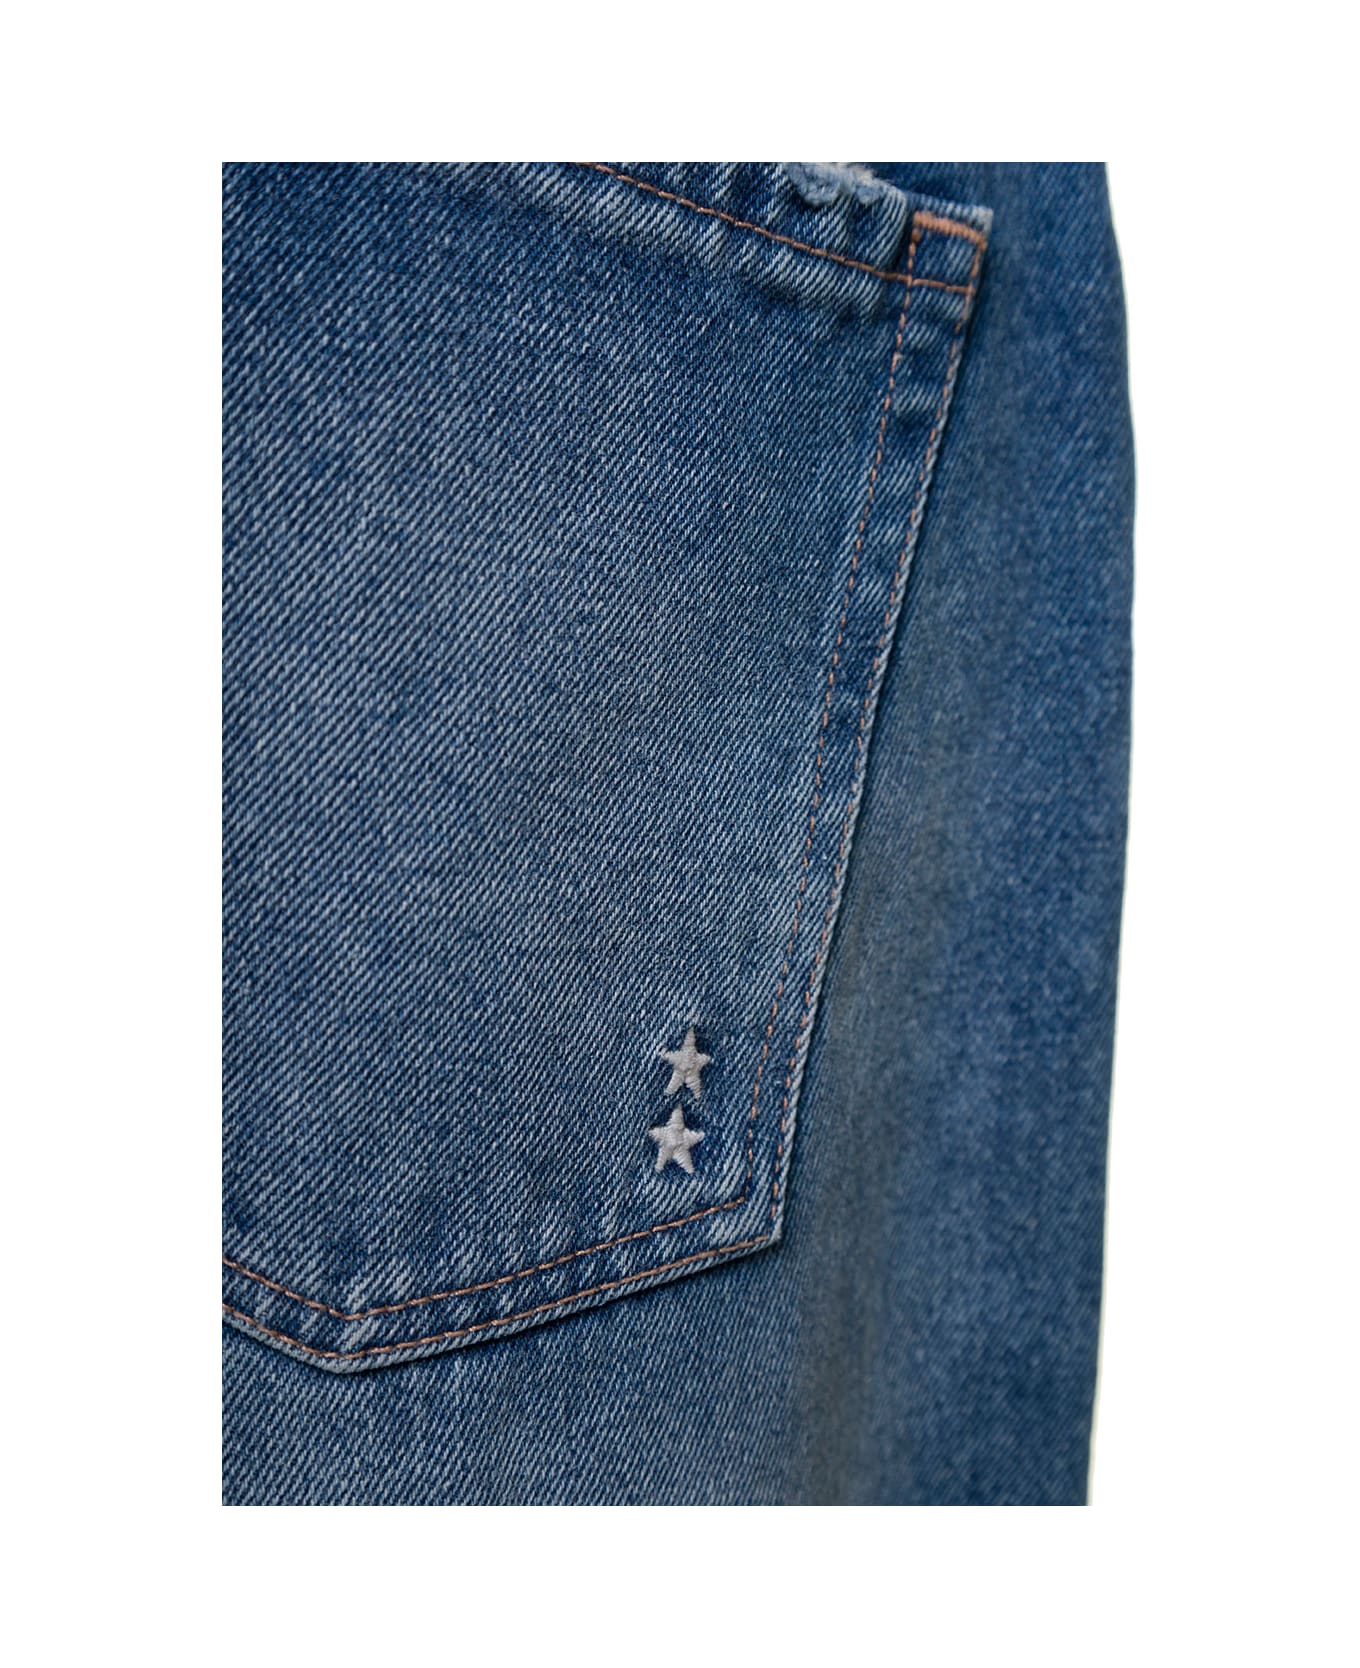 Icon Denim Light Blue High-waisted Jeans With Rips In Organic Cotton Denim Woman